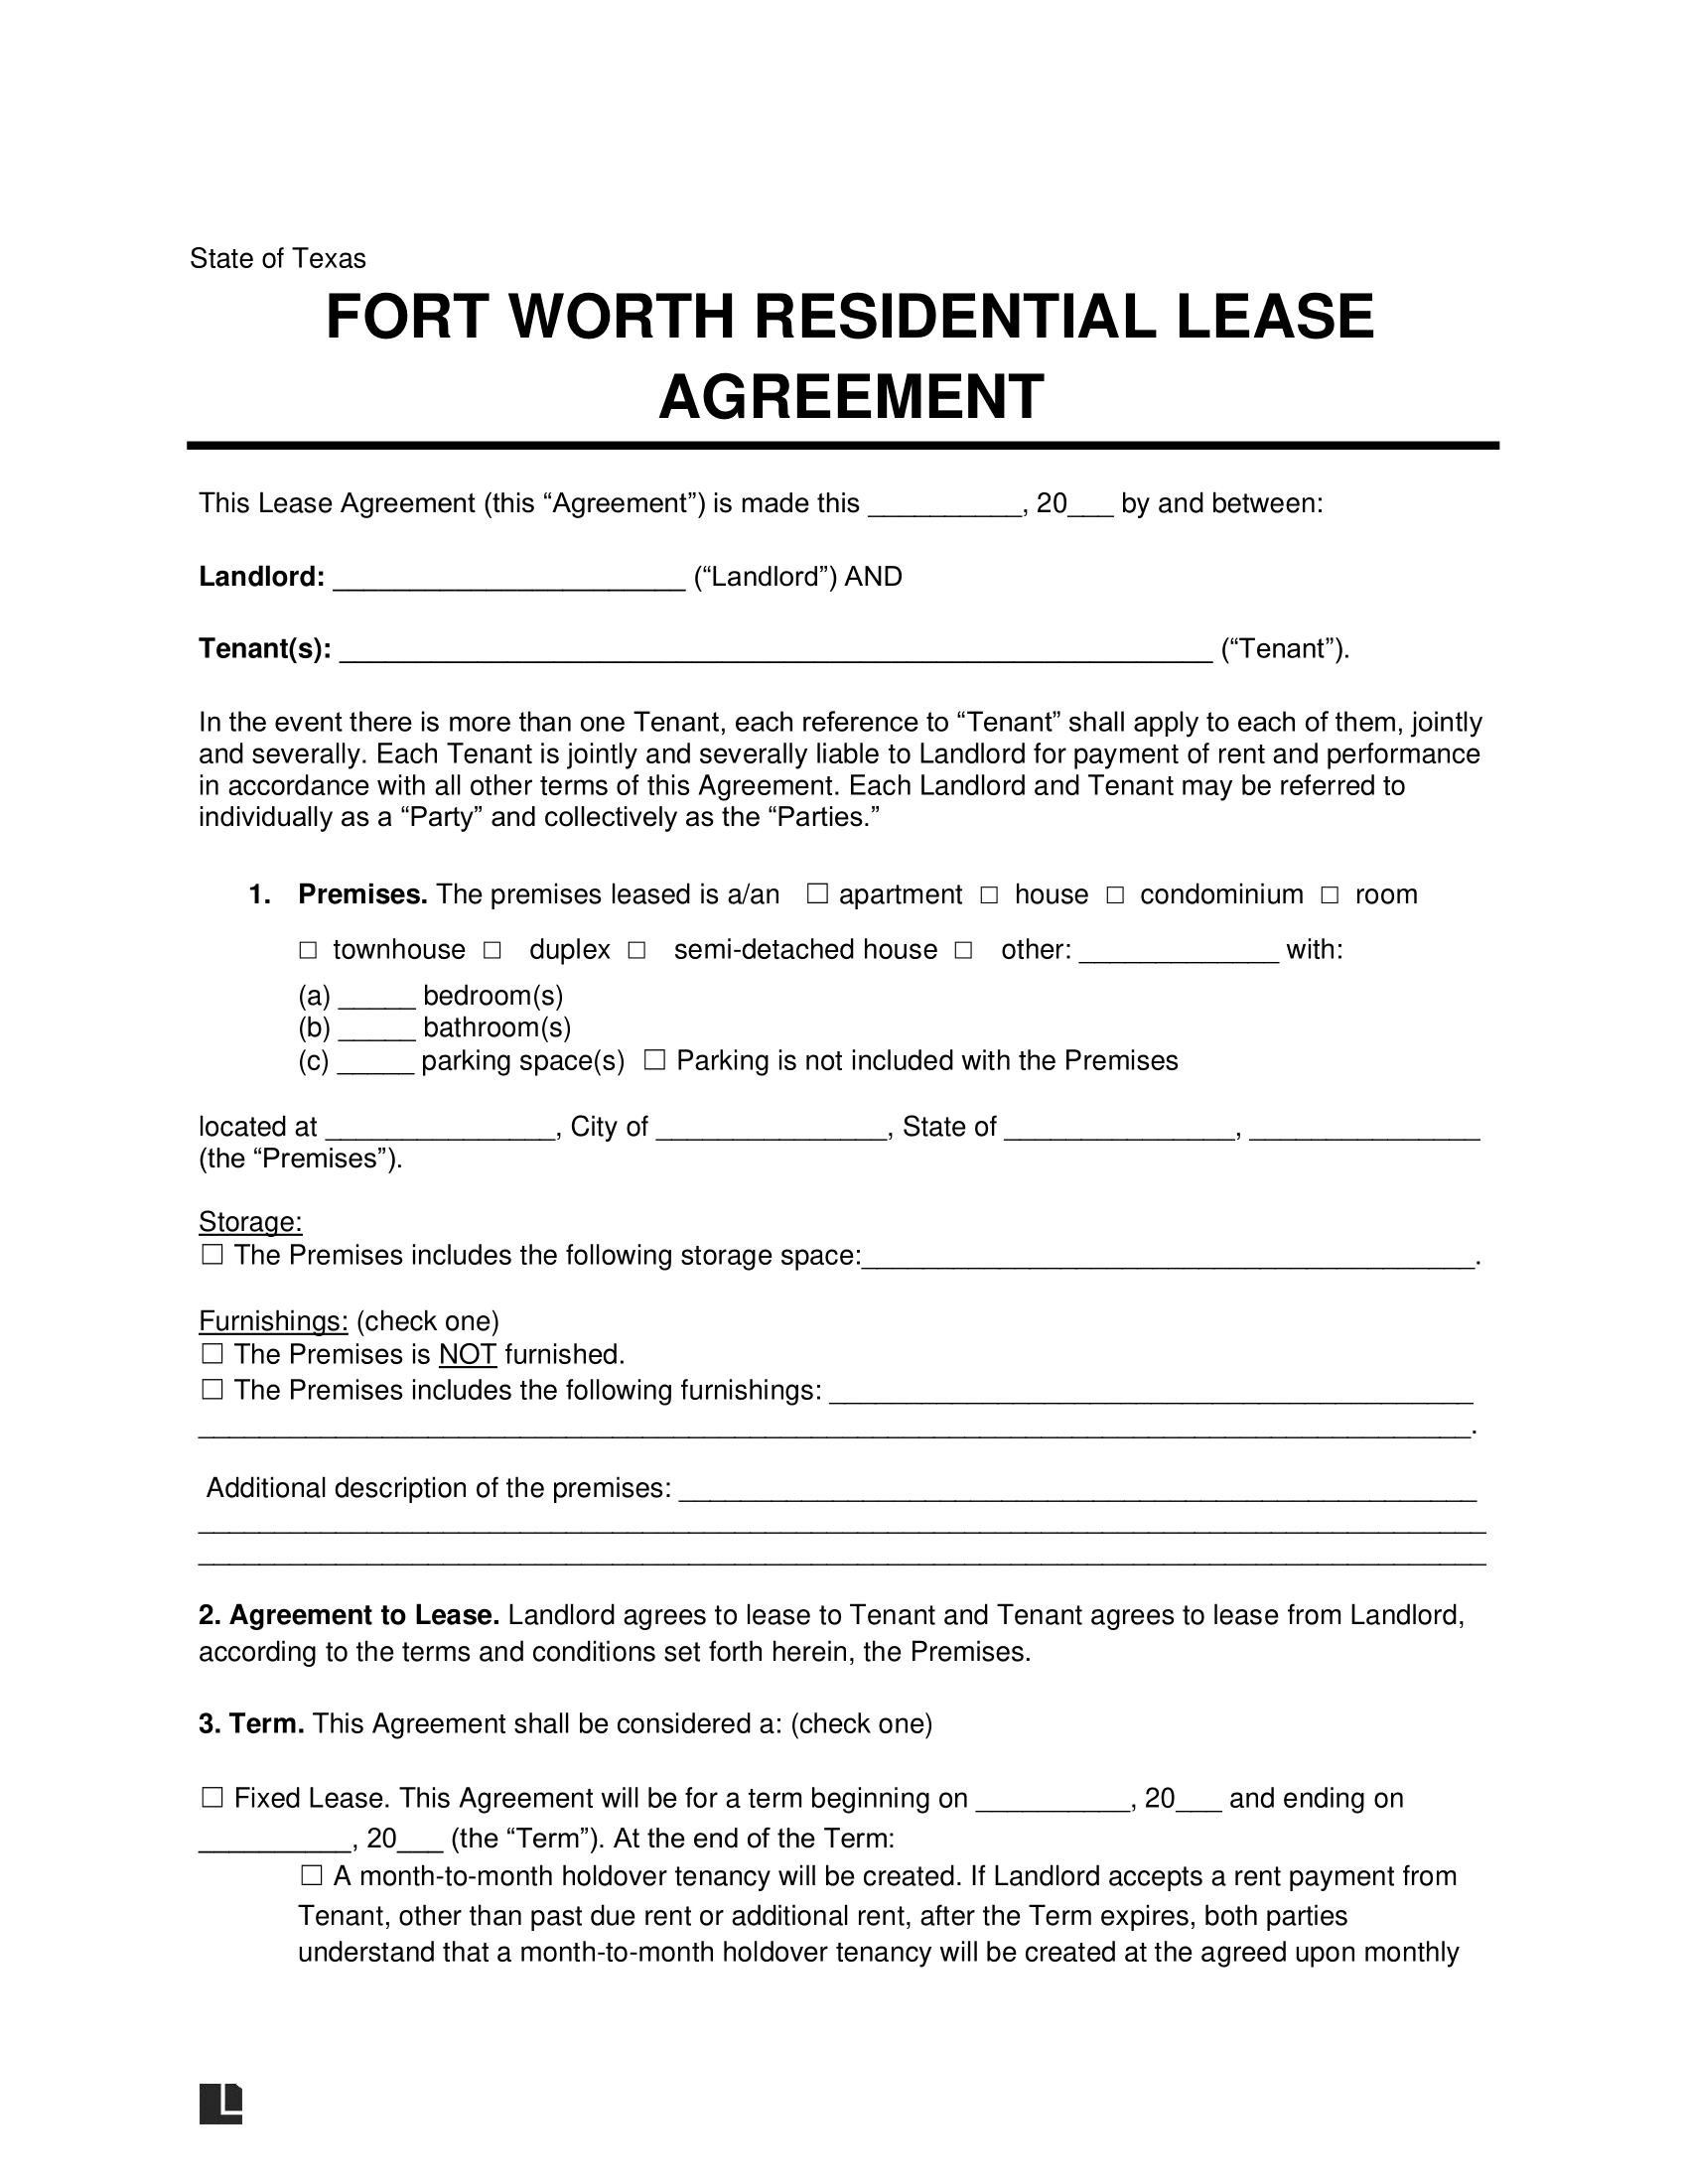 Fort Worth Residential Lease Agreement Template